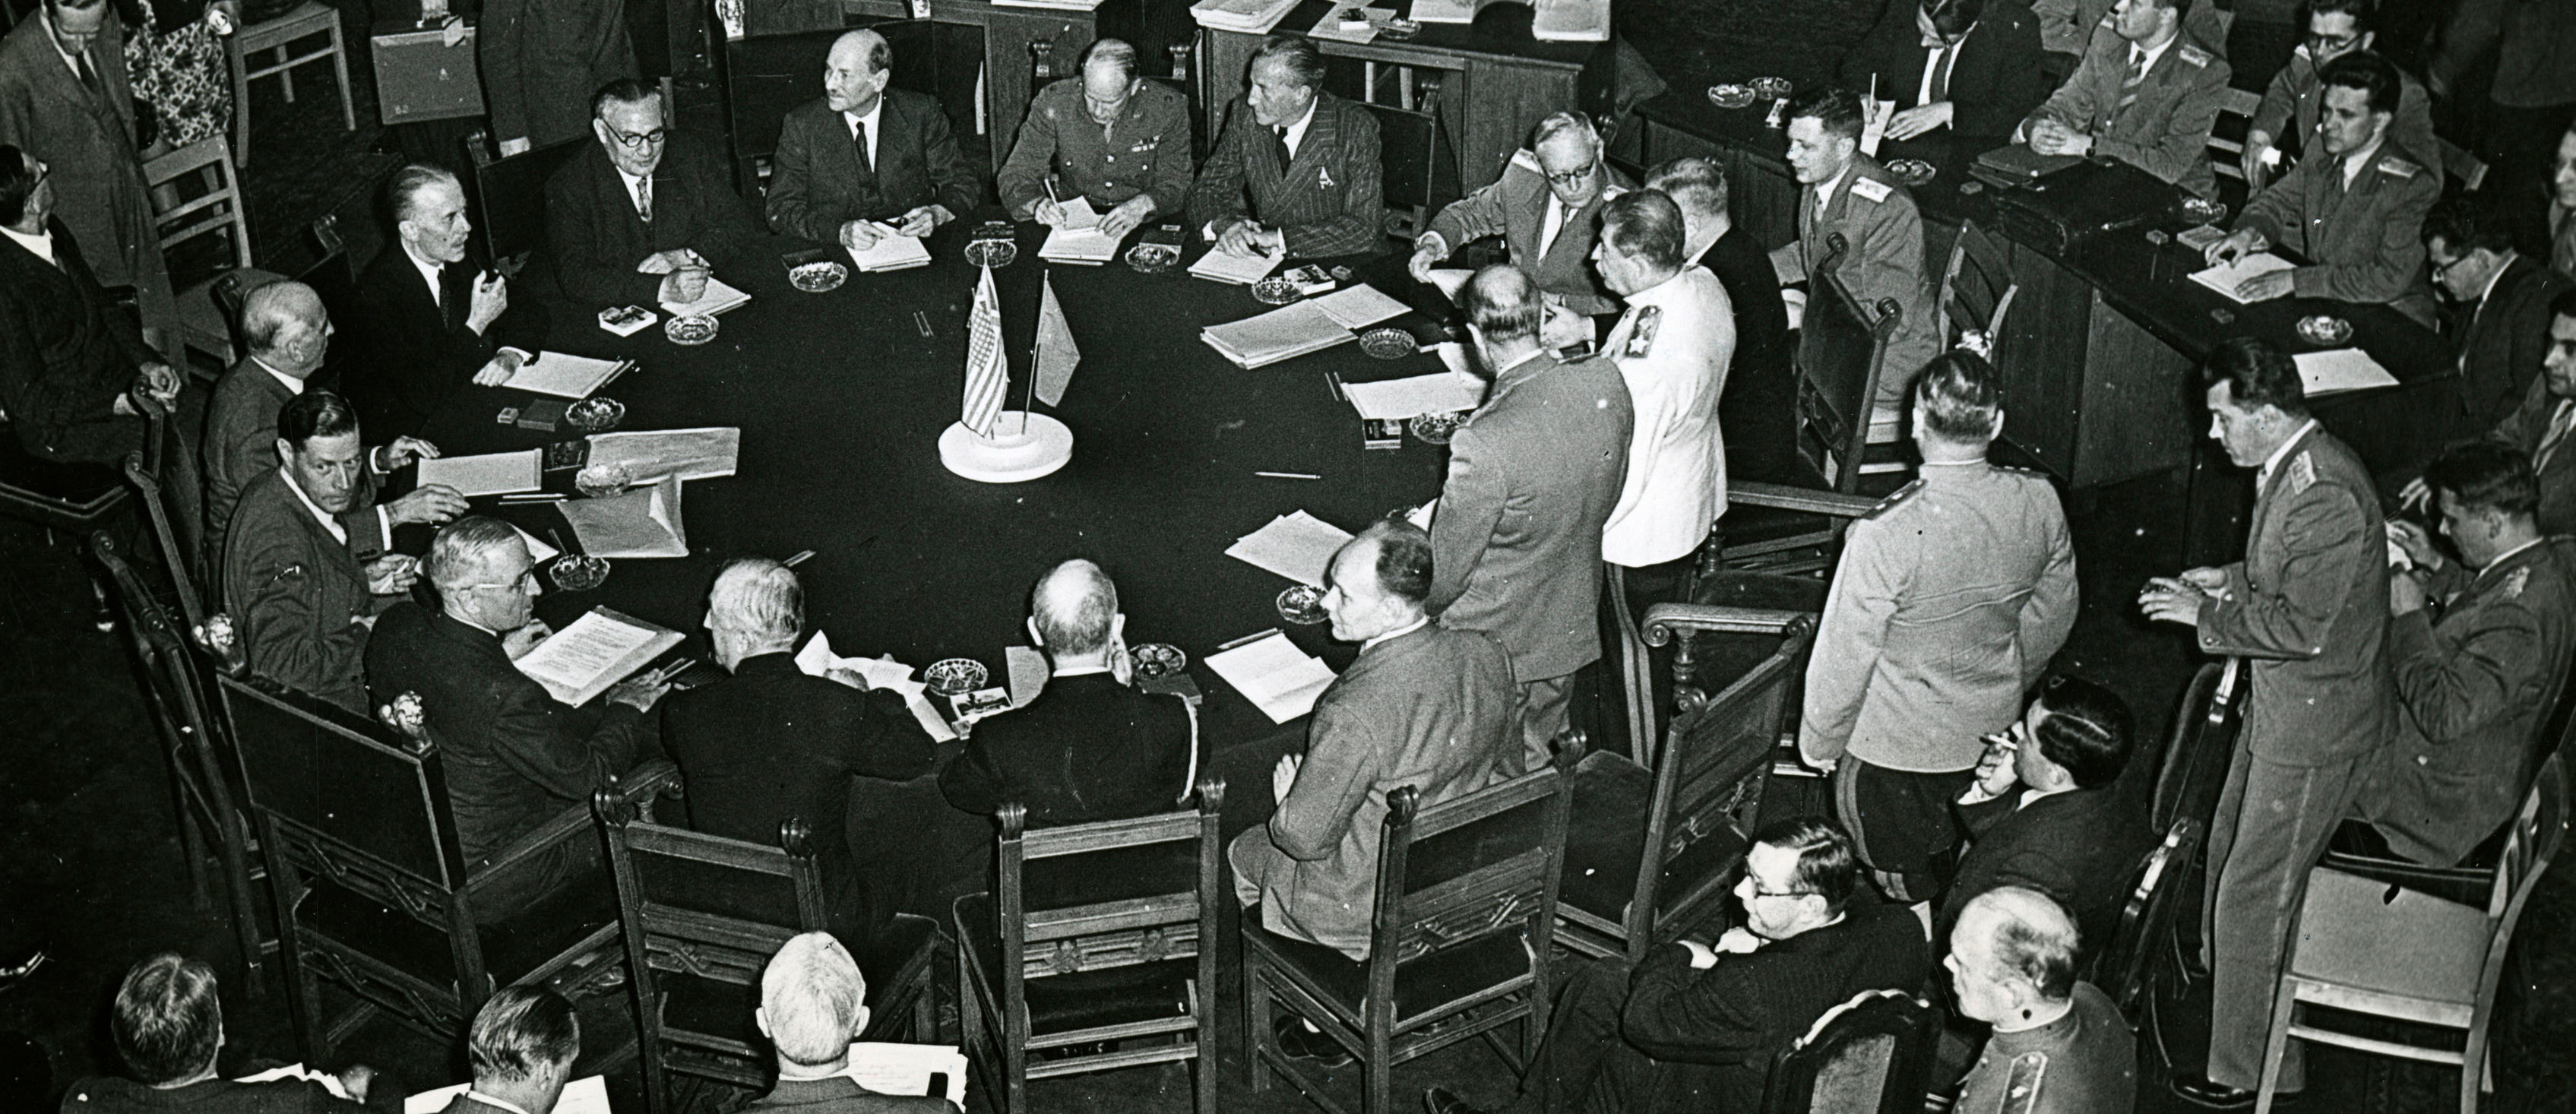 Allied leaders meet around a large circular table